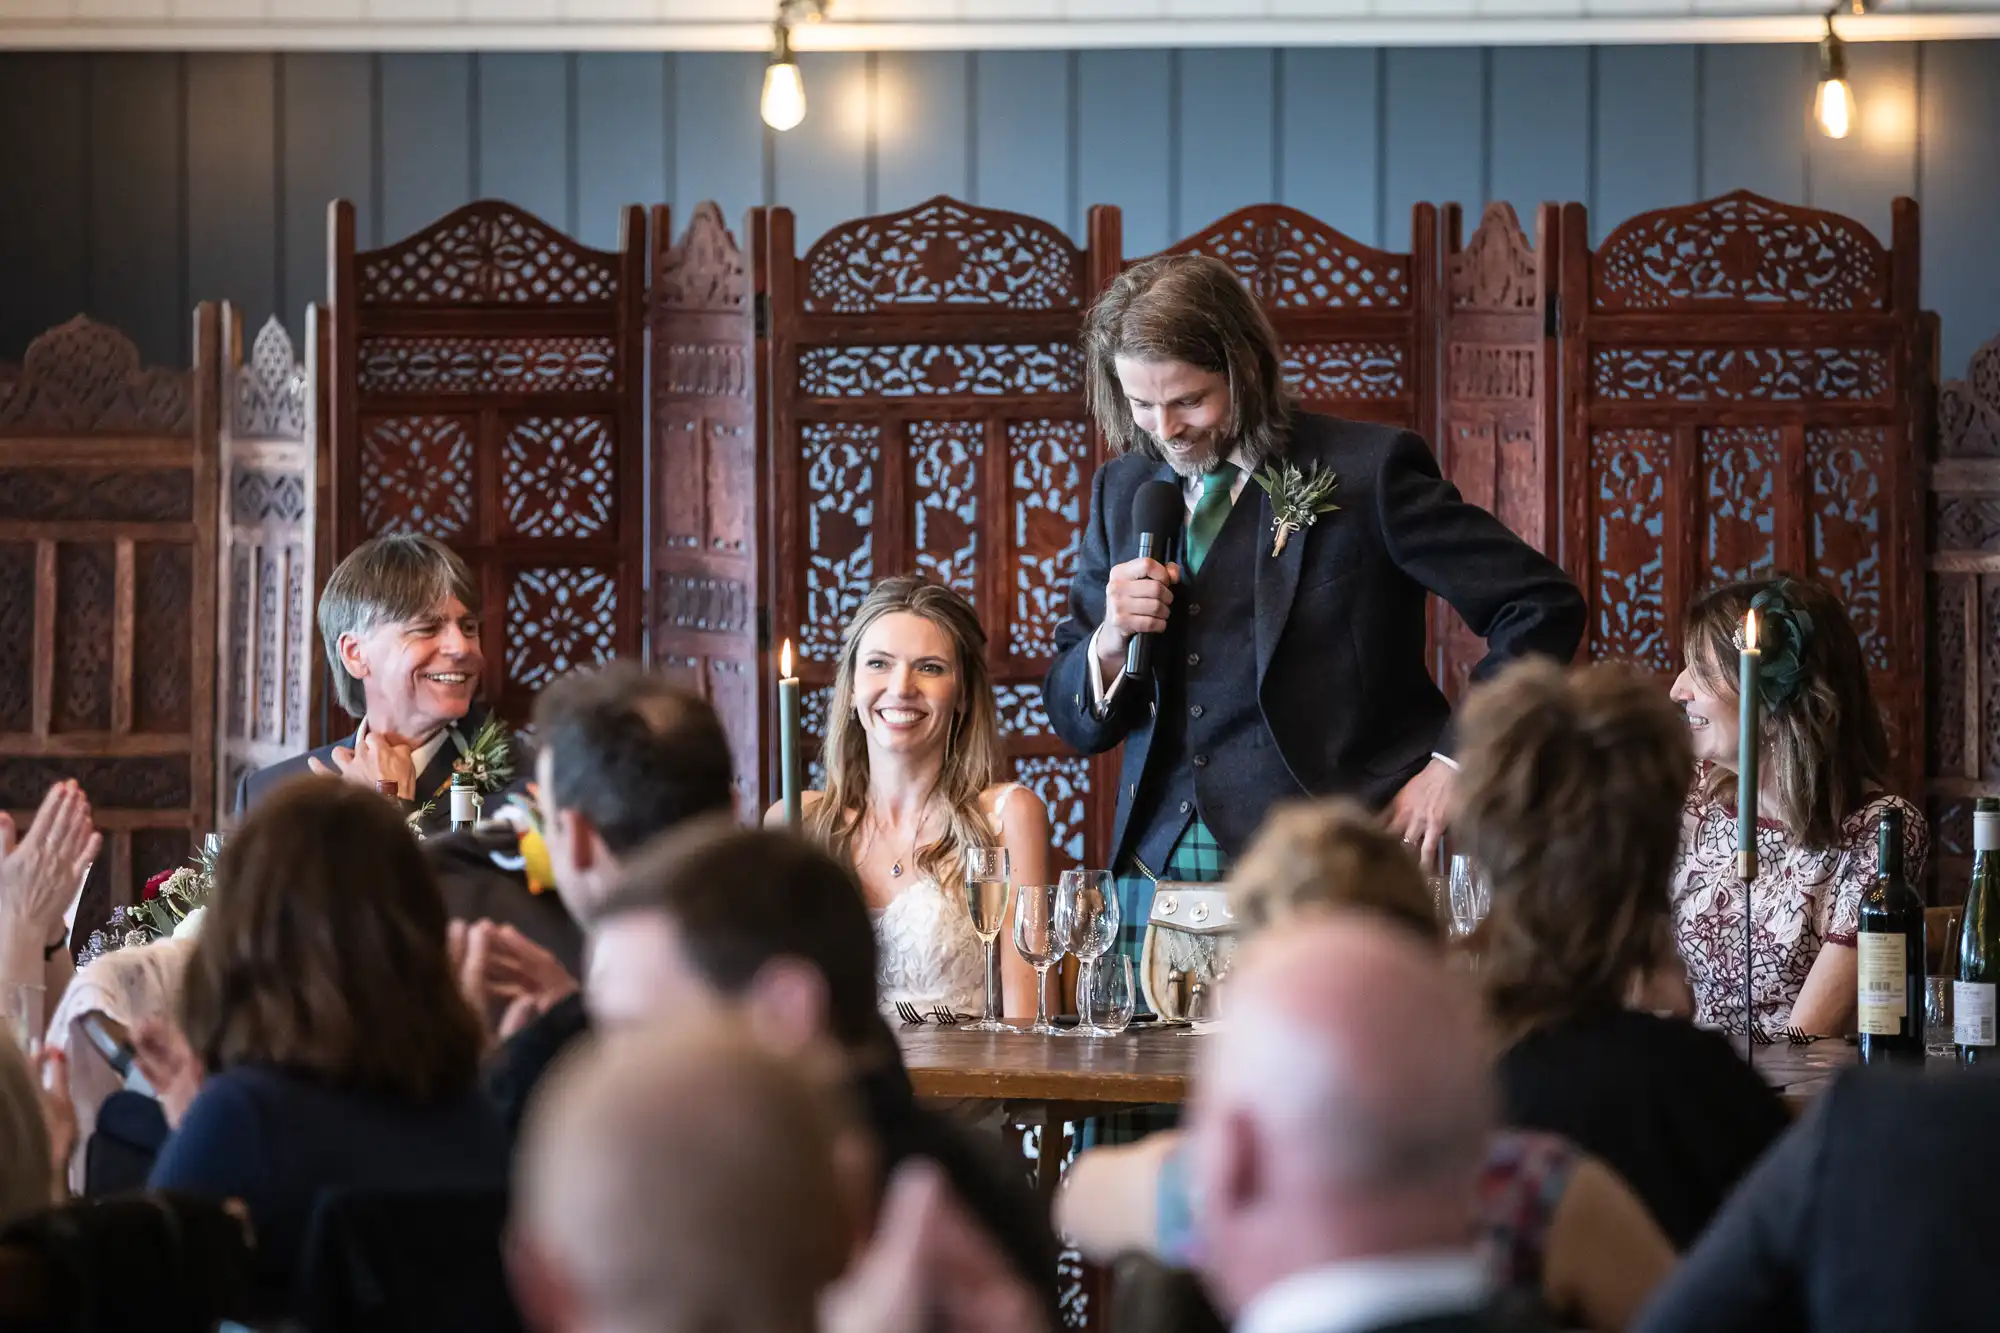 A man stands and speaks into a microphone at a formal gathering, while three people sit and smile in front of wooden decorative panels. The room is filled with seated guests.